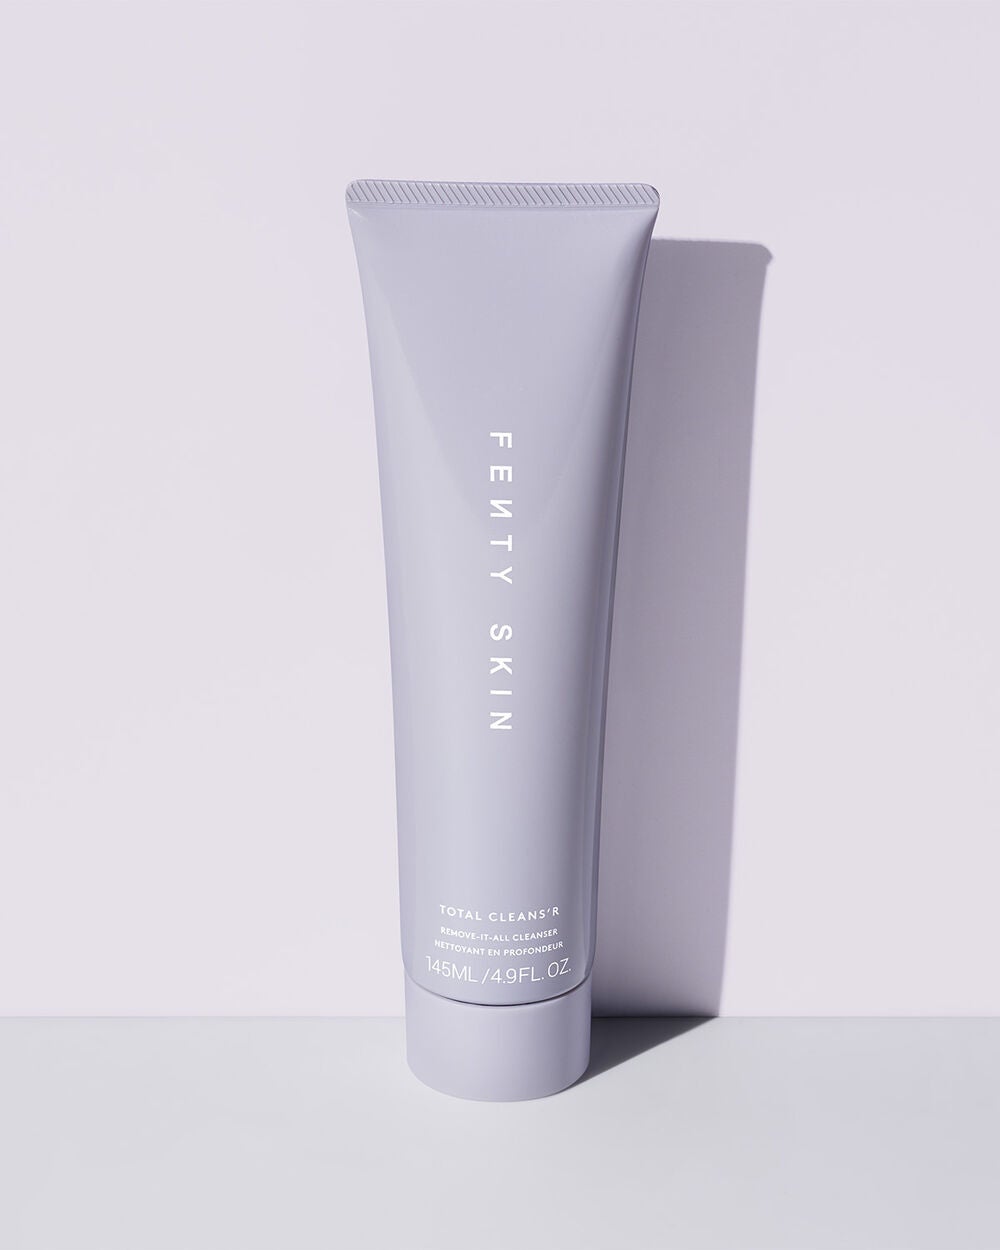 Rihanna Fenty Skin Care Line Is Officially Here